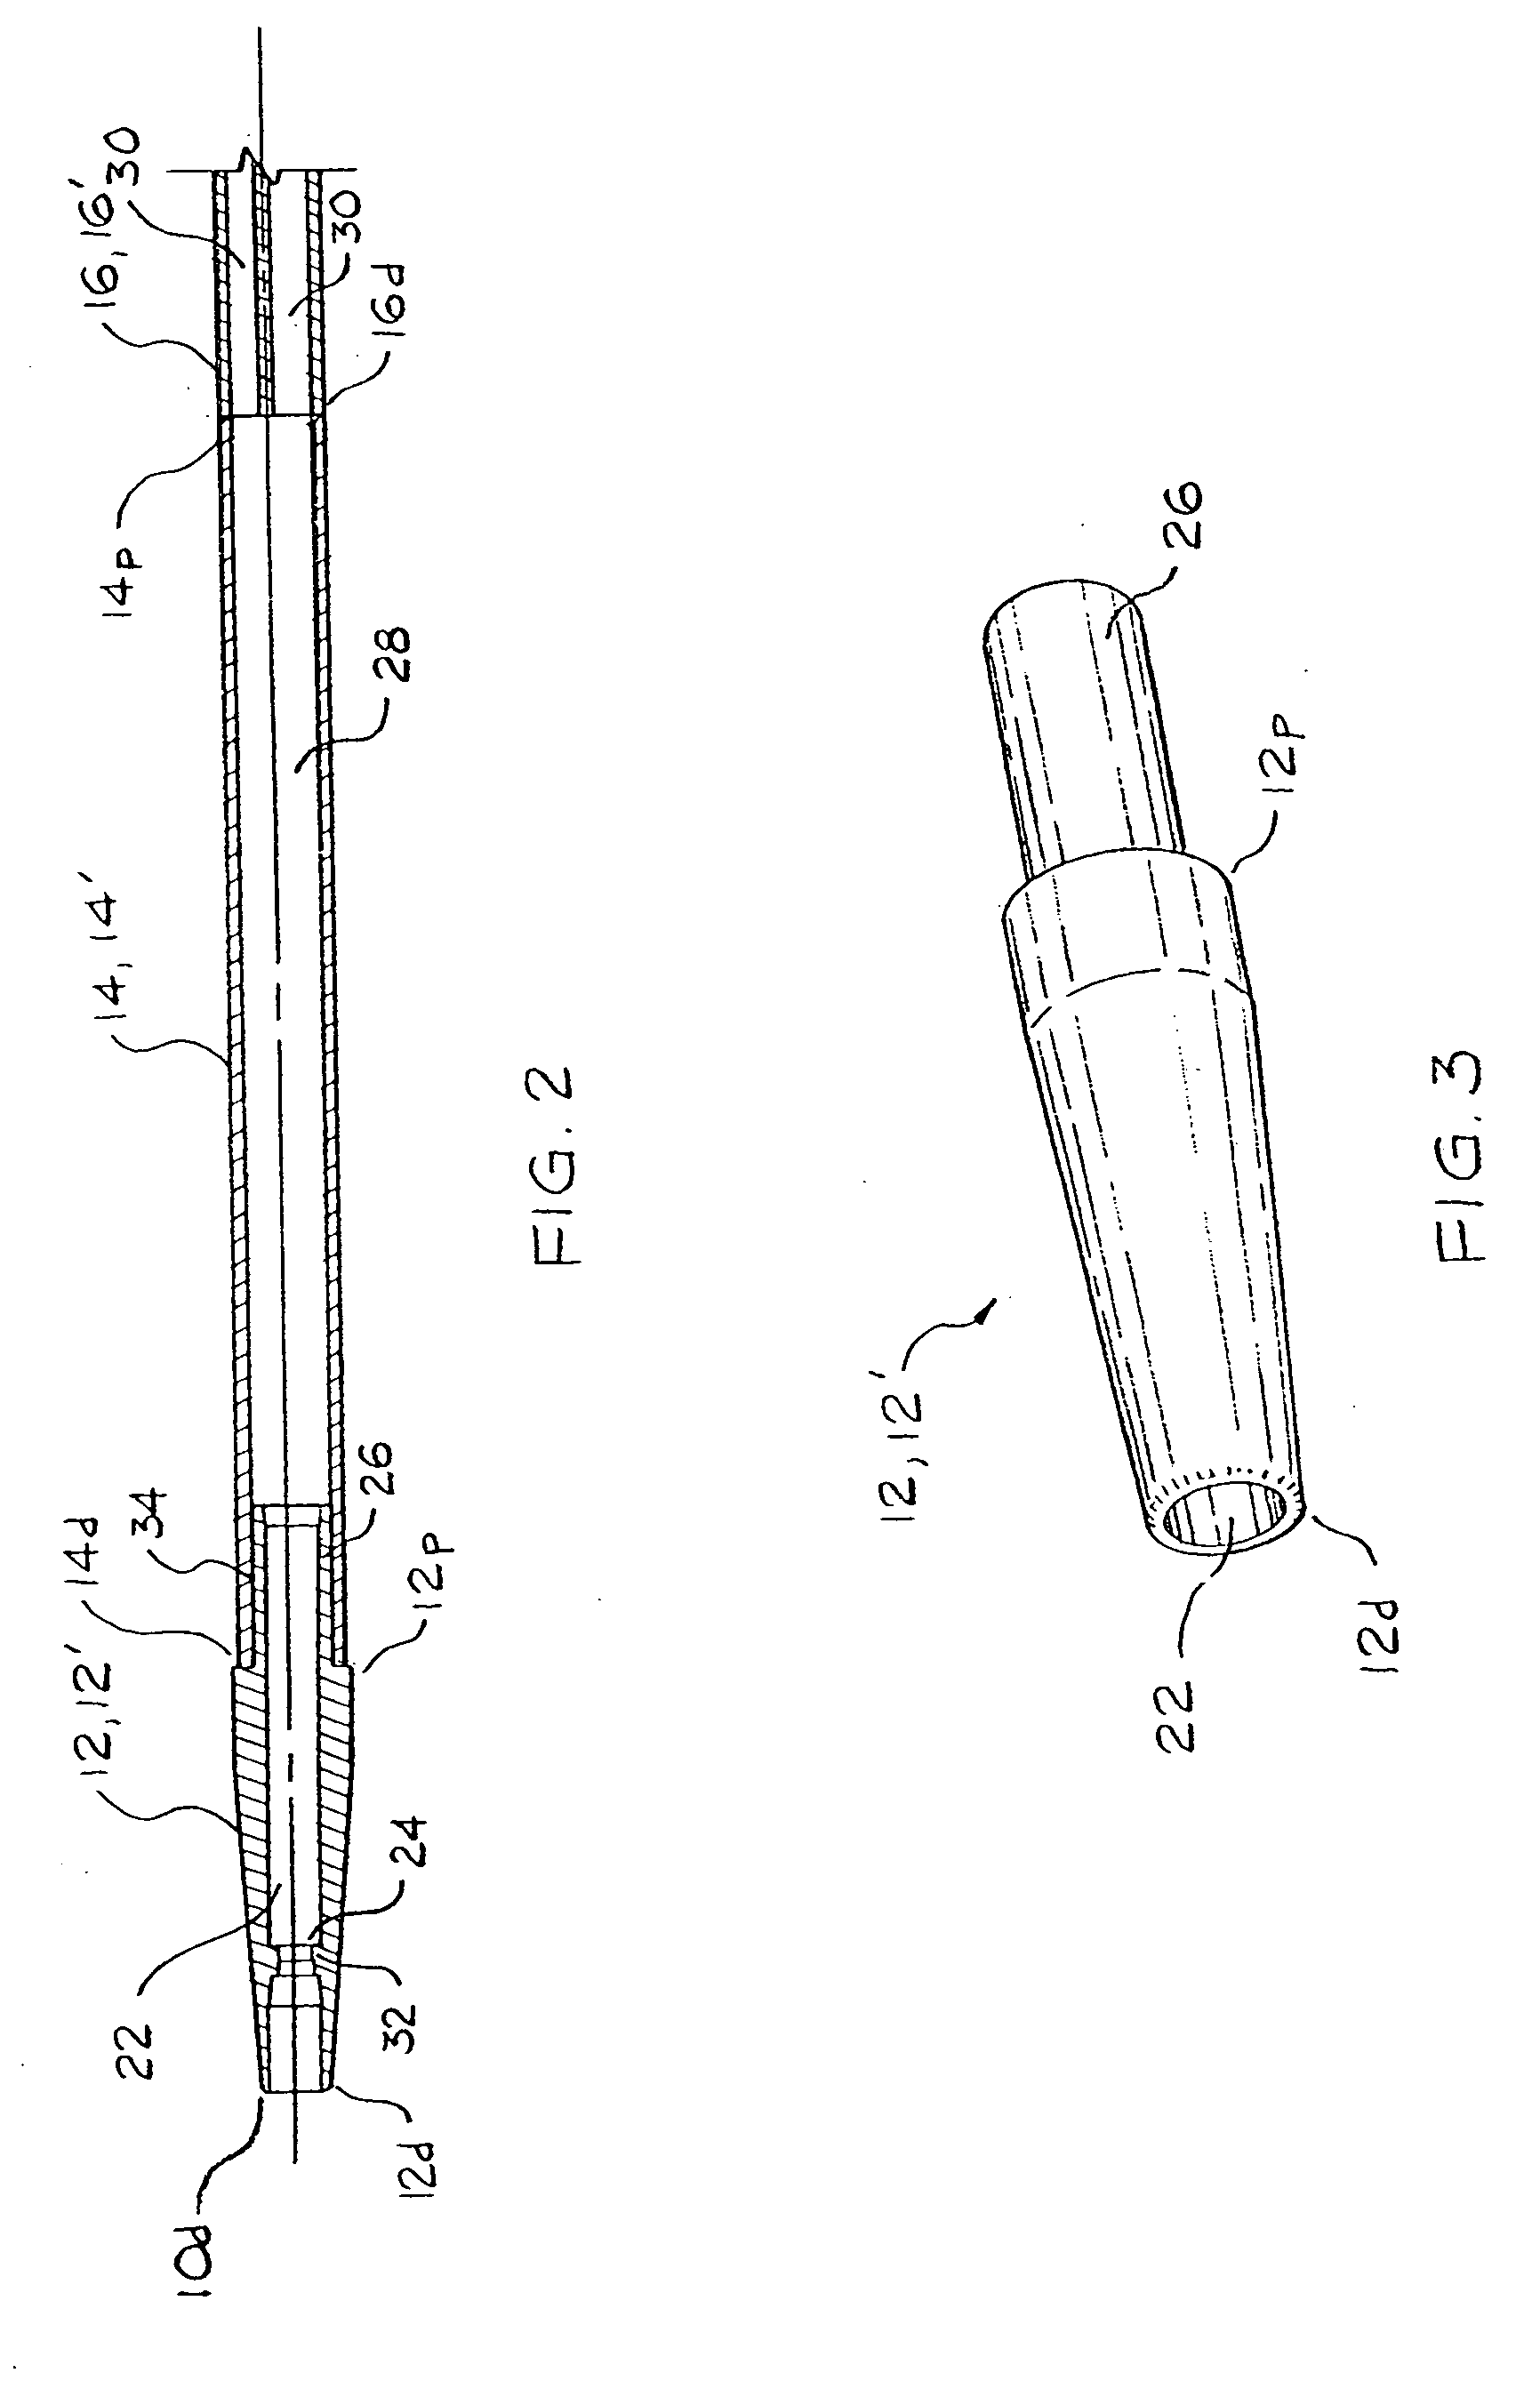 Multi-lumen catheter with integrated connector